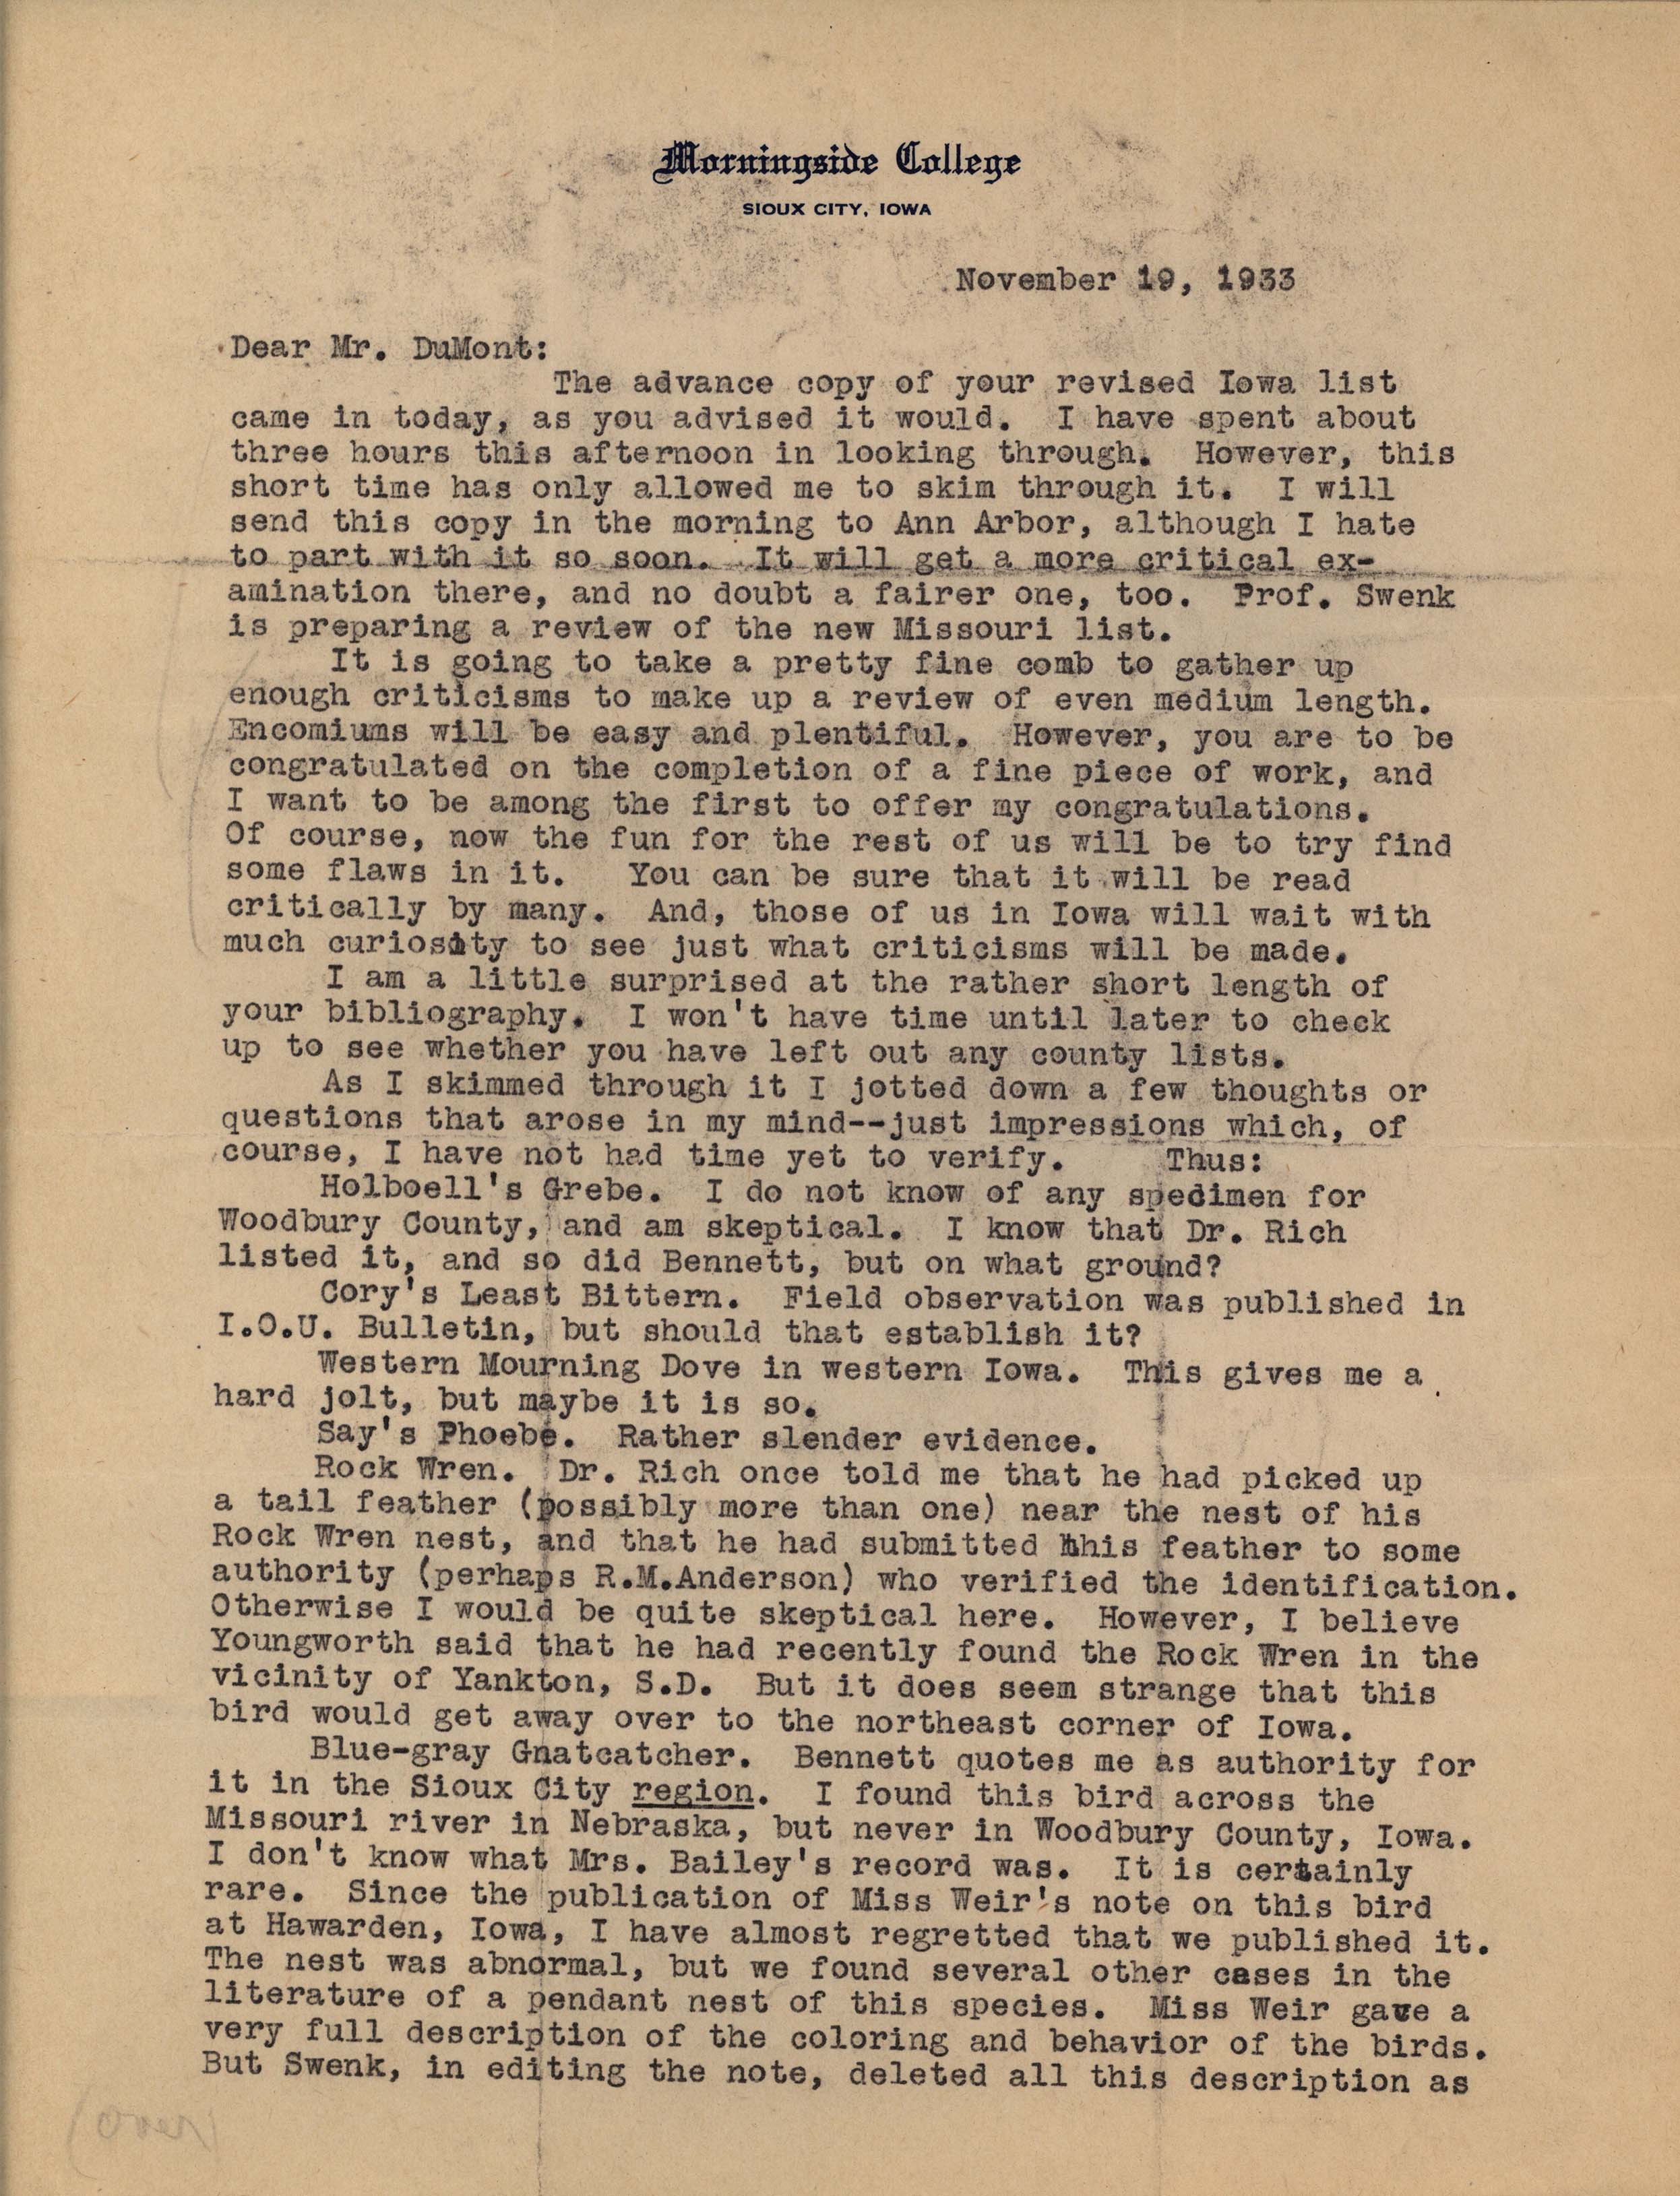 Thomas Stephens letter to Philip DuMont regarding questionable birds in the Revised List of Iowa Birds, November 19, 1933